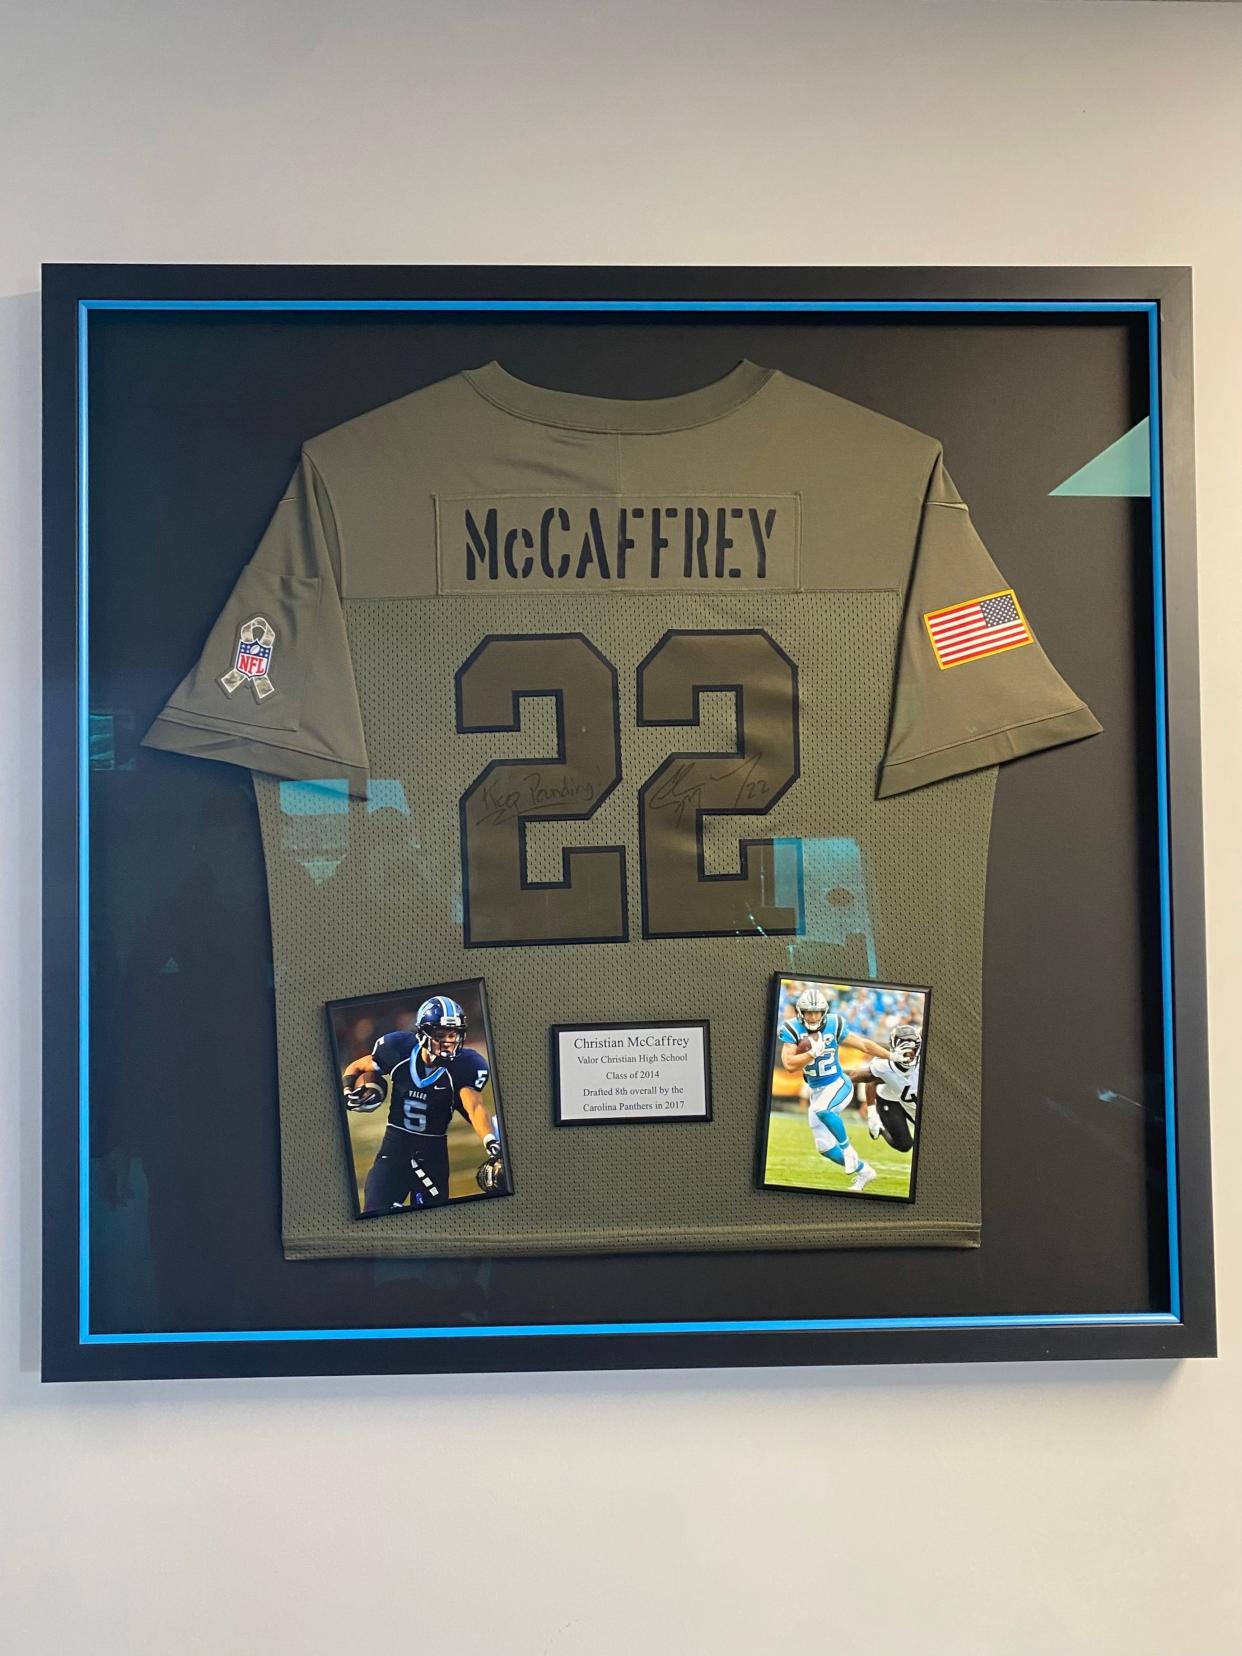 A signed Christian McCaffrey jersey hangs in the press box at Valor Christian High School. The All-Pro running back played football at the school and will play in Super Bowl 58 as a member of the San Francisco 49ers.